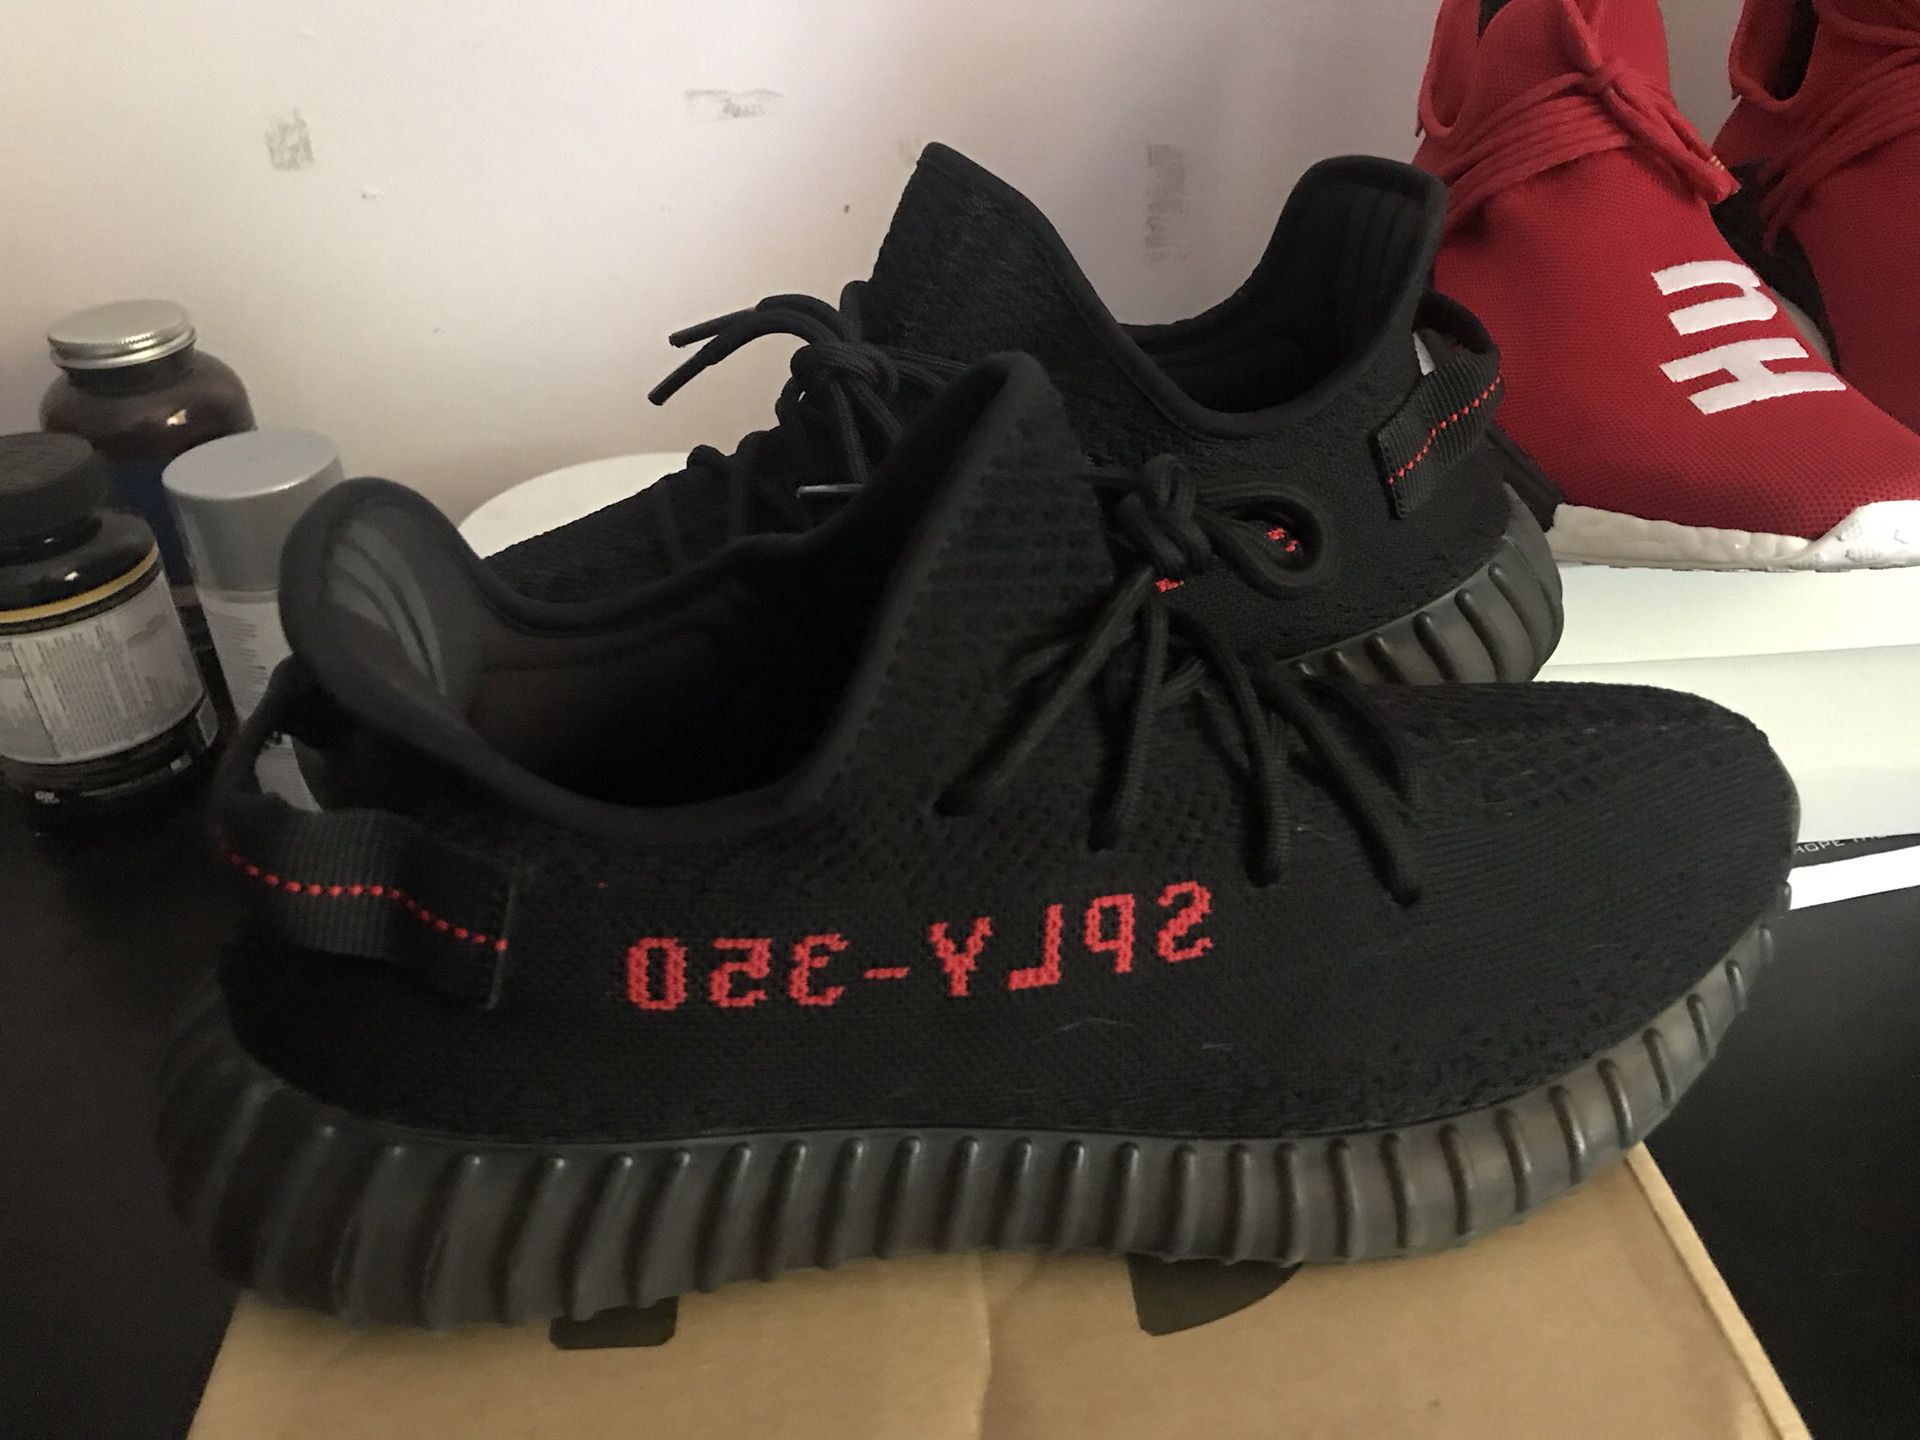 dæmning tidligere Menda City Authentic Yeezy Bred V1 for Sale in NJ, US - OfferUp